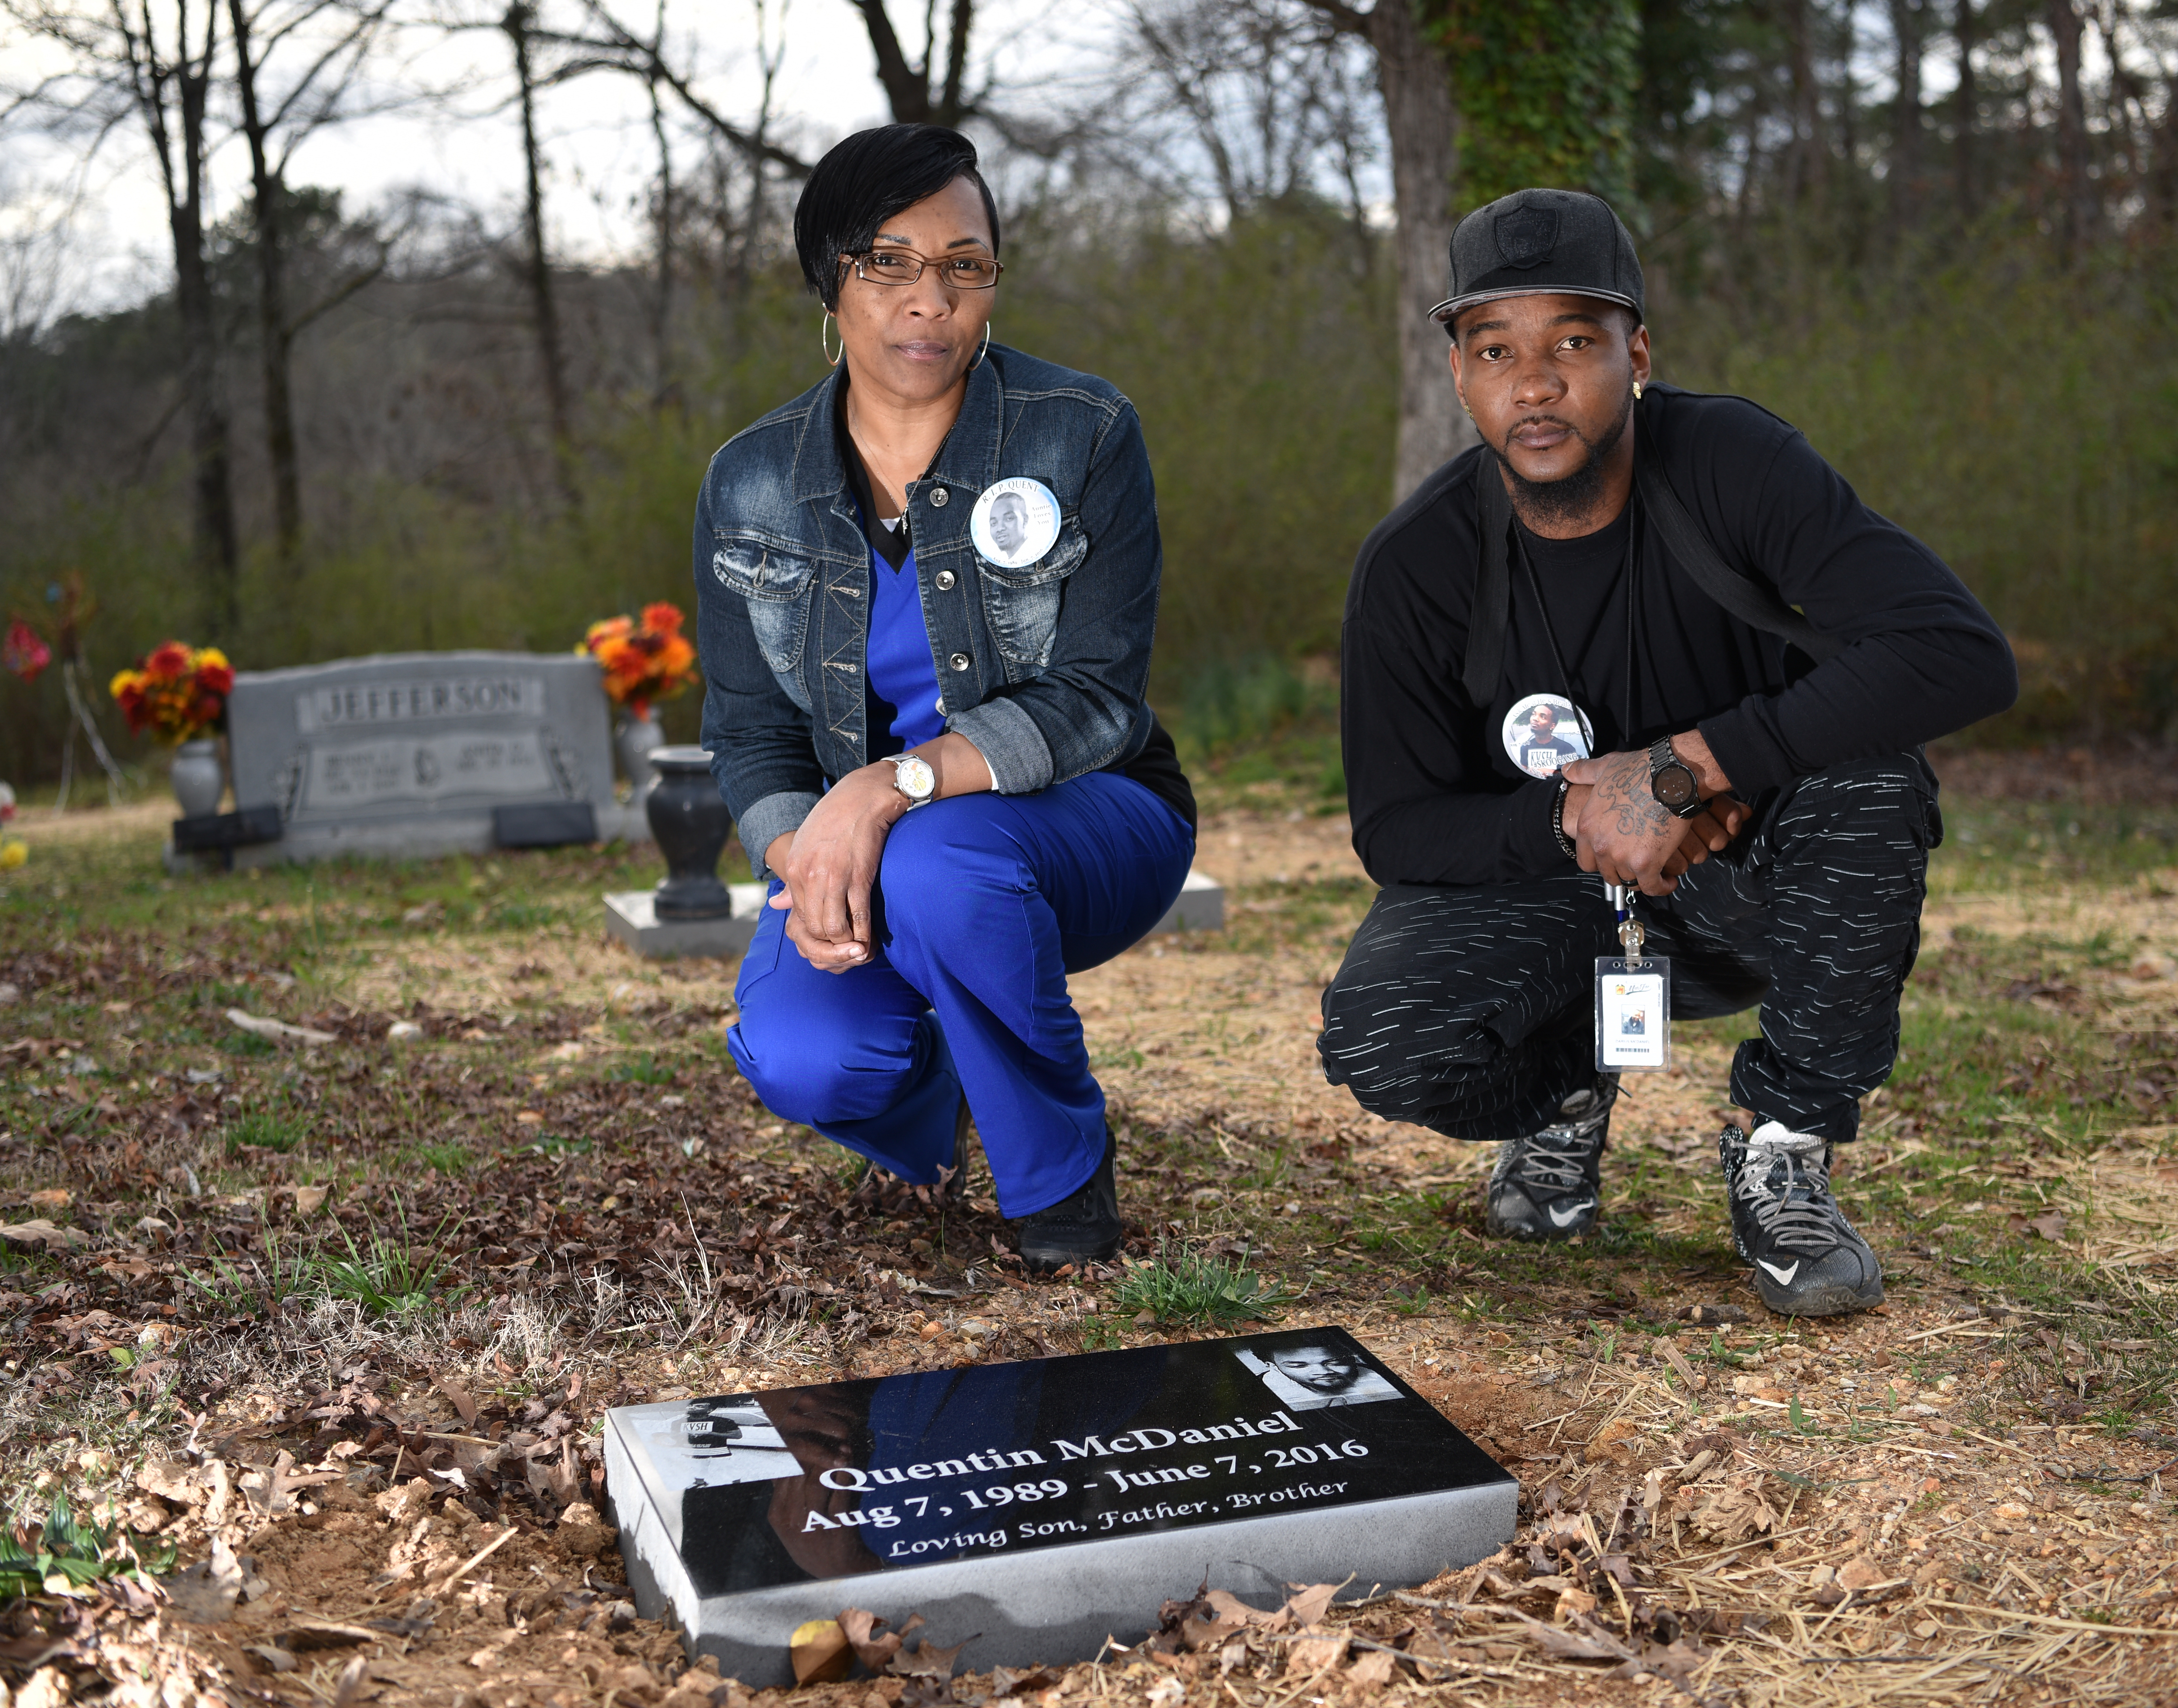 Quentin McDaniel died June 7, 2016 and his killer has not been arrested his mother Jacqueline Jones and older brother Darius McDaniel near his gravesite where they often visit. (Frank Couch / The Birmingham Times)